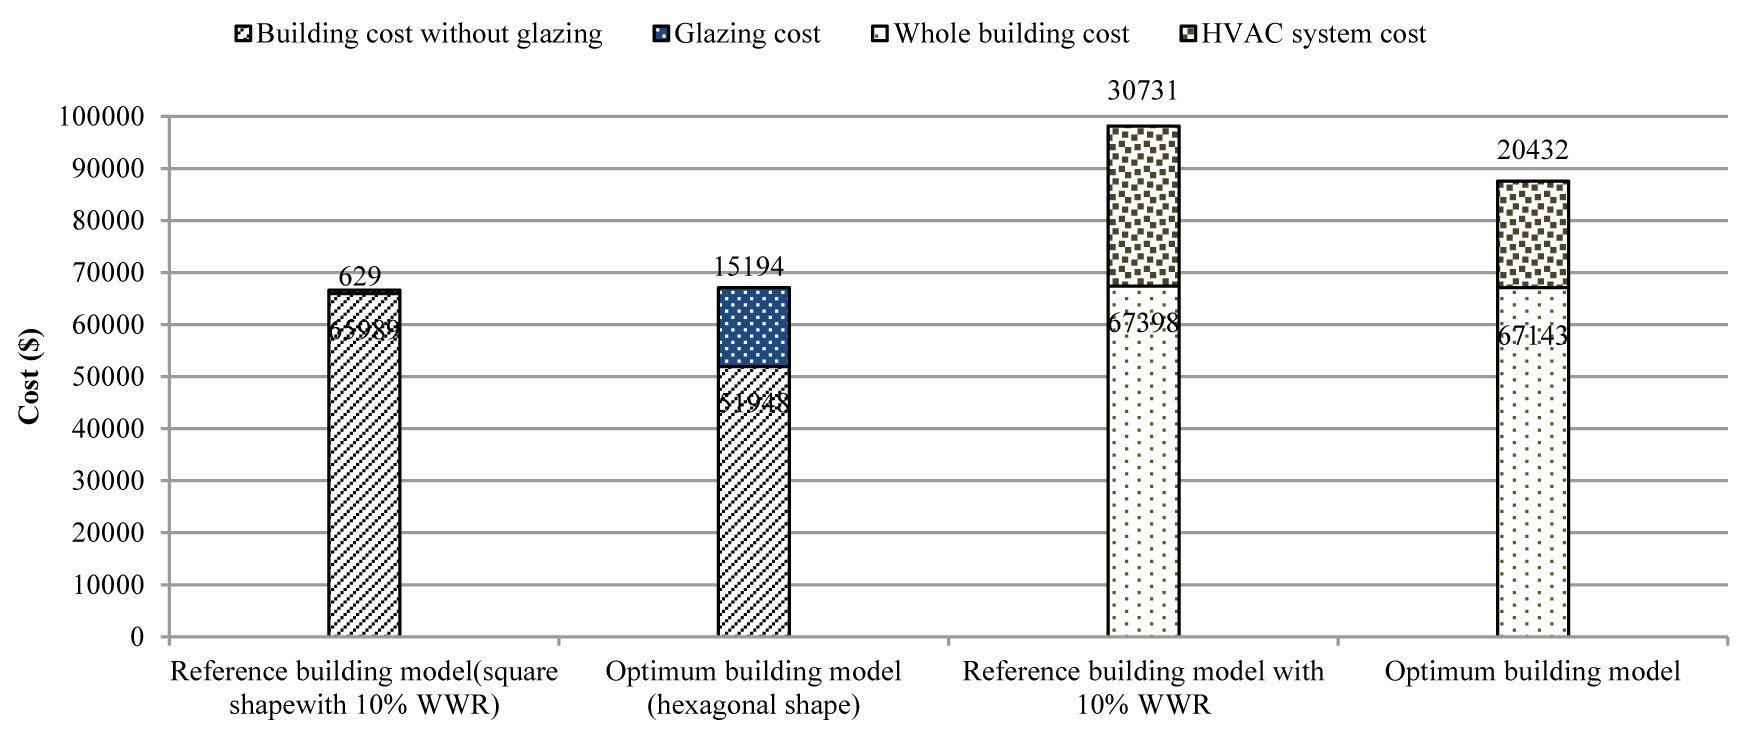 Economic impact of the reference building model with 10%WWR and the optimum building model.